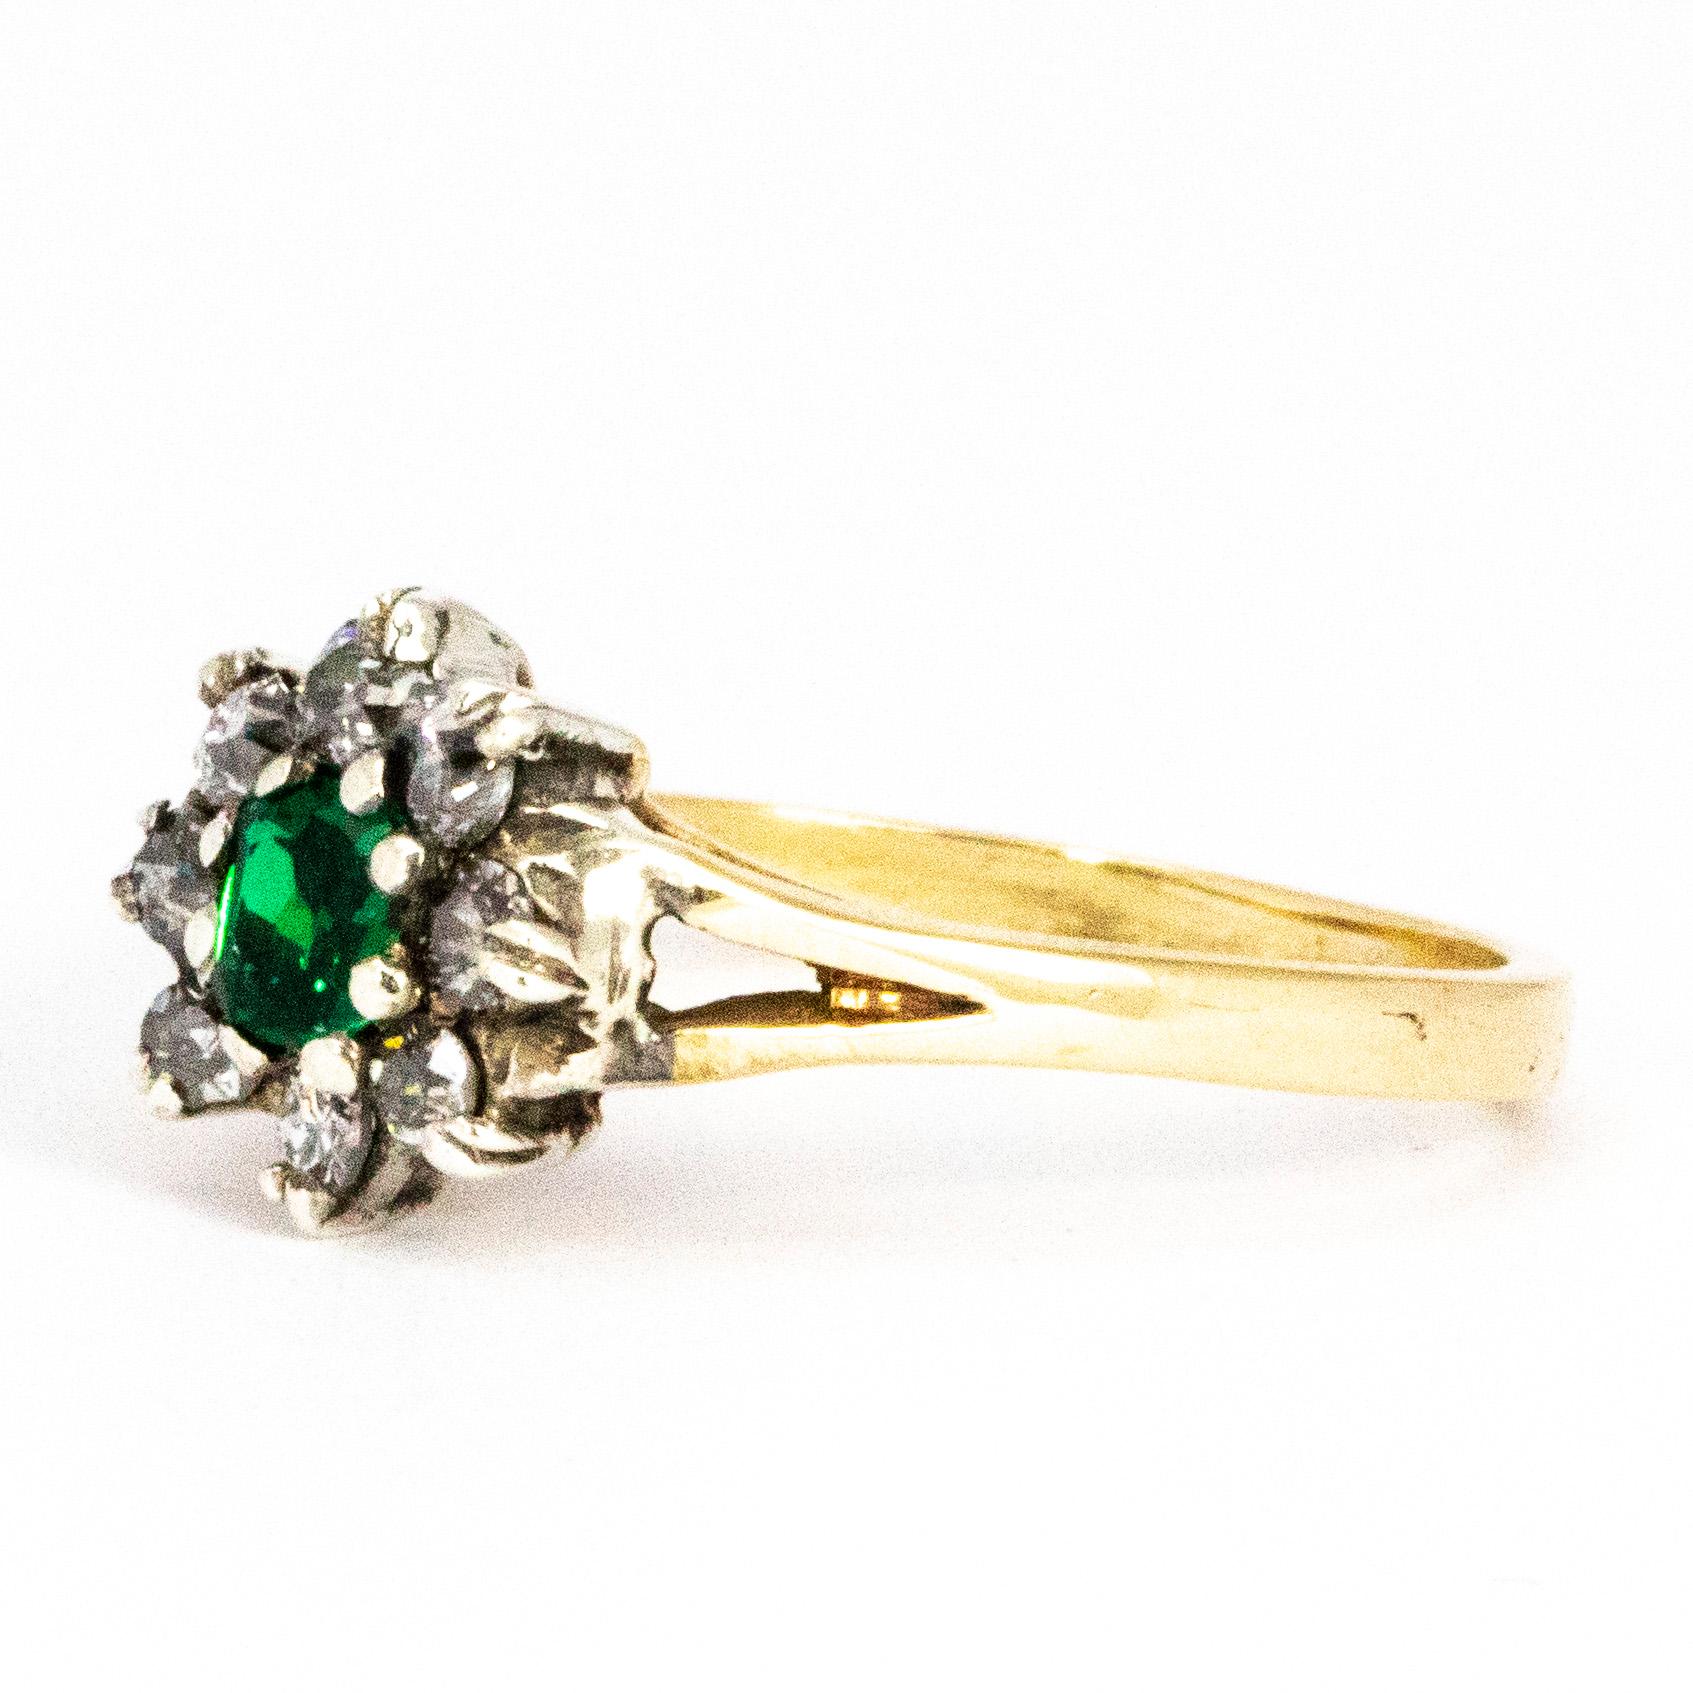 Sat at the centre of this gorgeous cluster is  35pt emerald and surrounding the wonderfully deep green stone are a halo of sparkling old mine cut diamonds measuring a total of 40pts. 

Ring Size: N 1/2 or 7
Cluster Diameter: 9.5mm